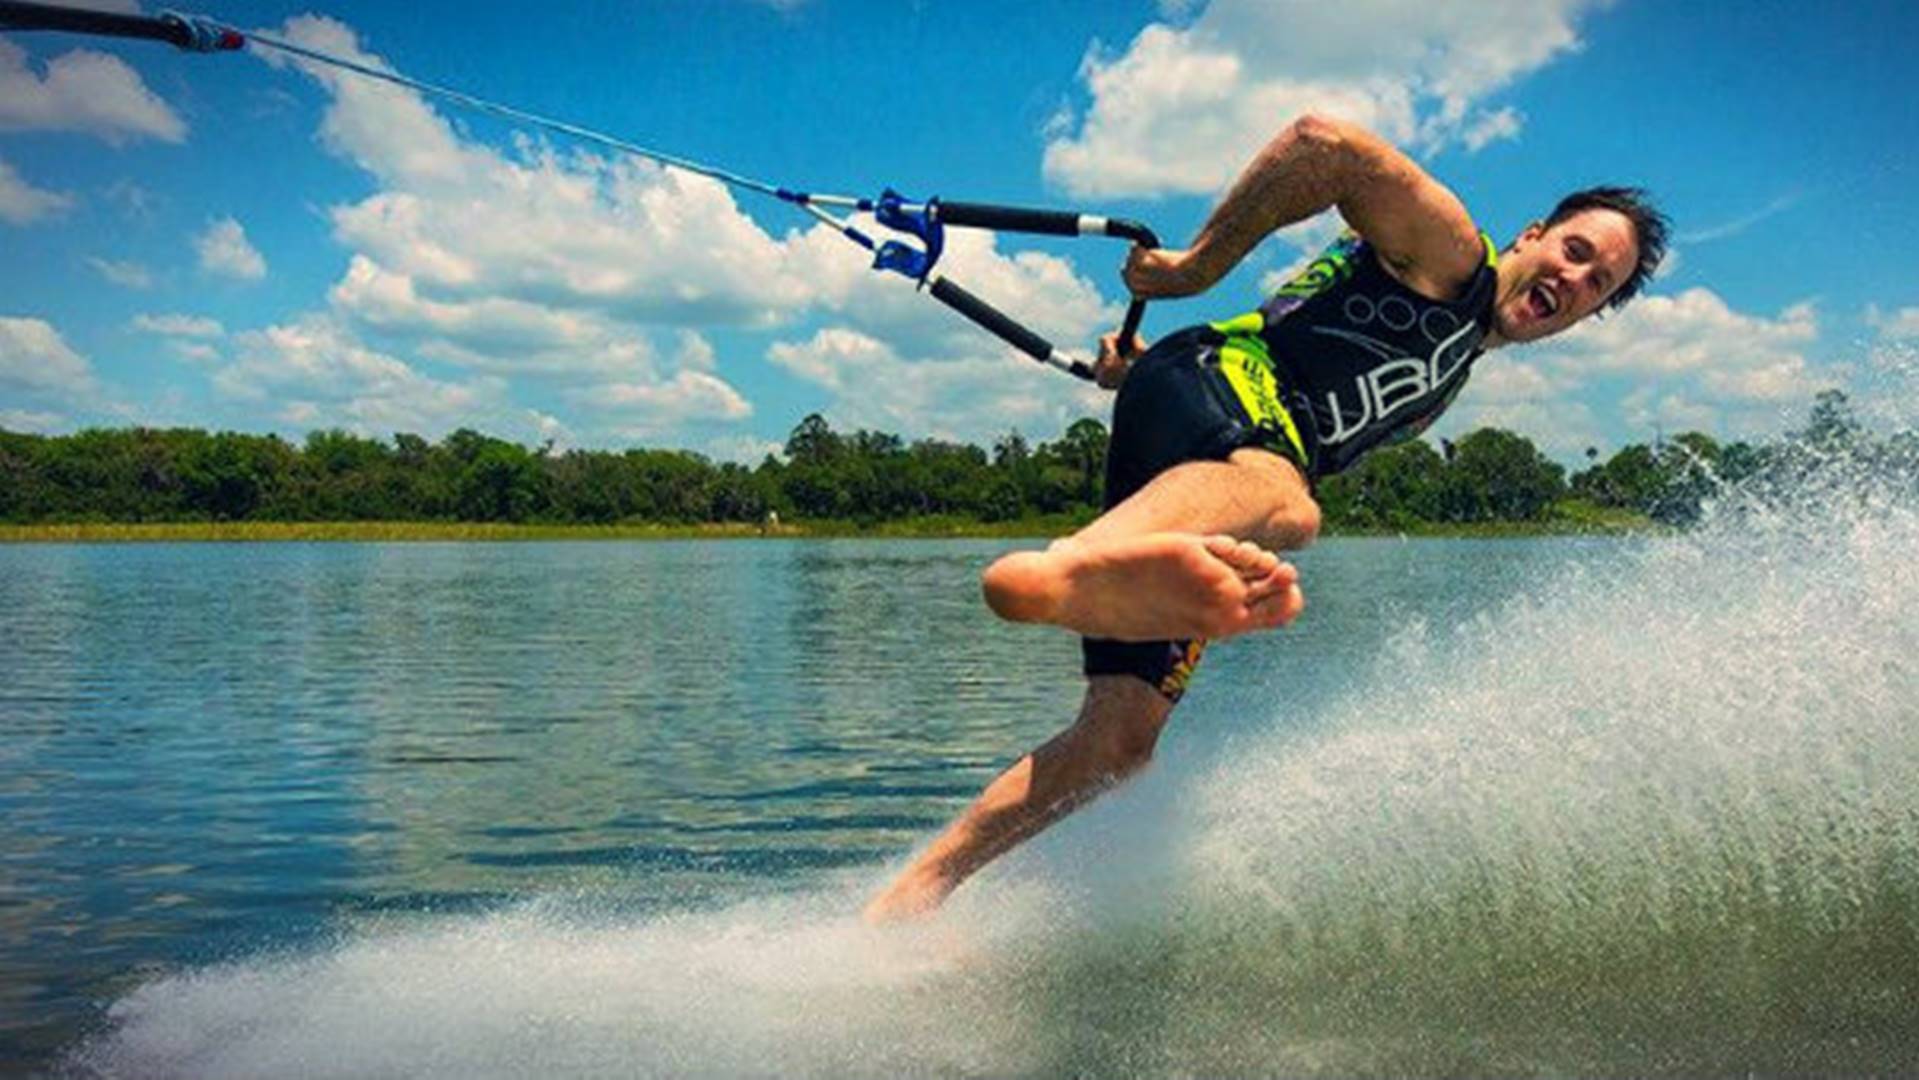 41 EXTREME Sports Listed From Intense To INSANE! (PHOTO-GALLERY)